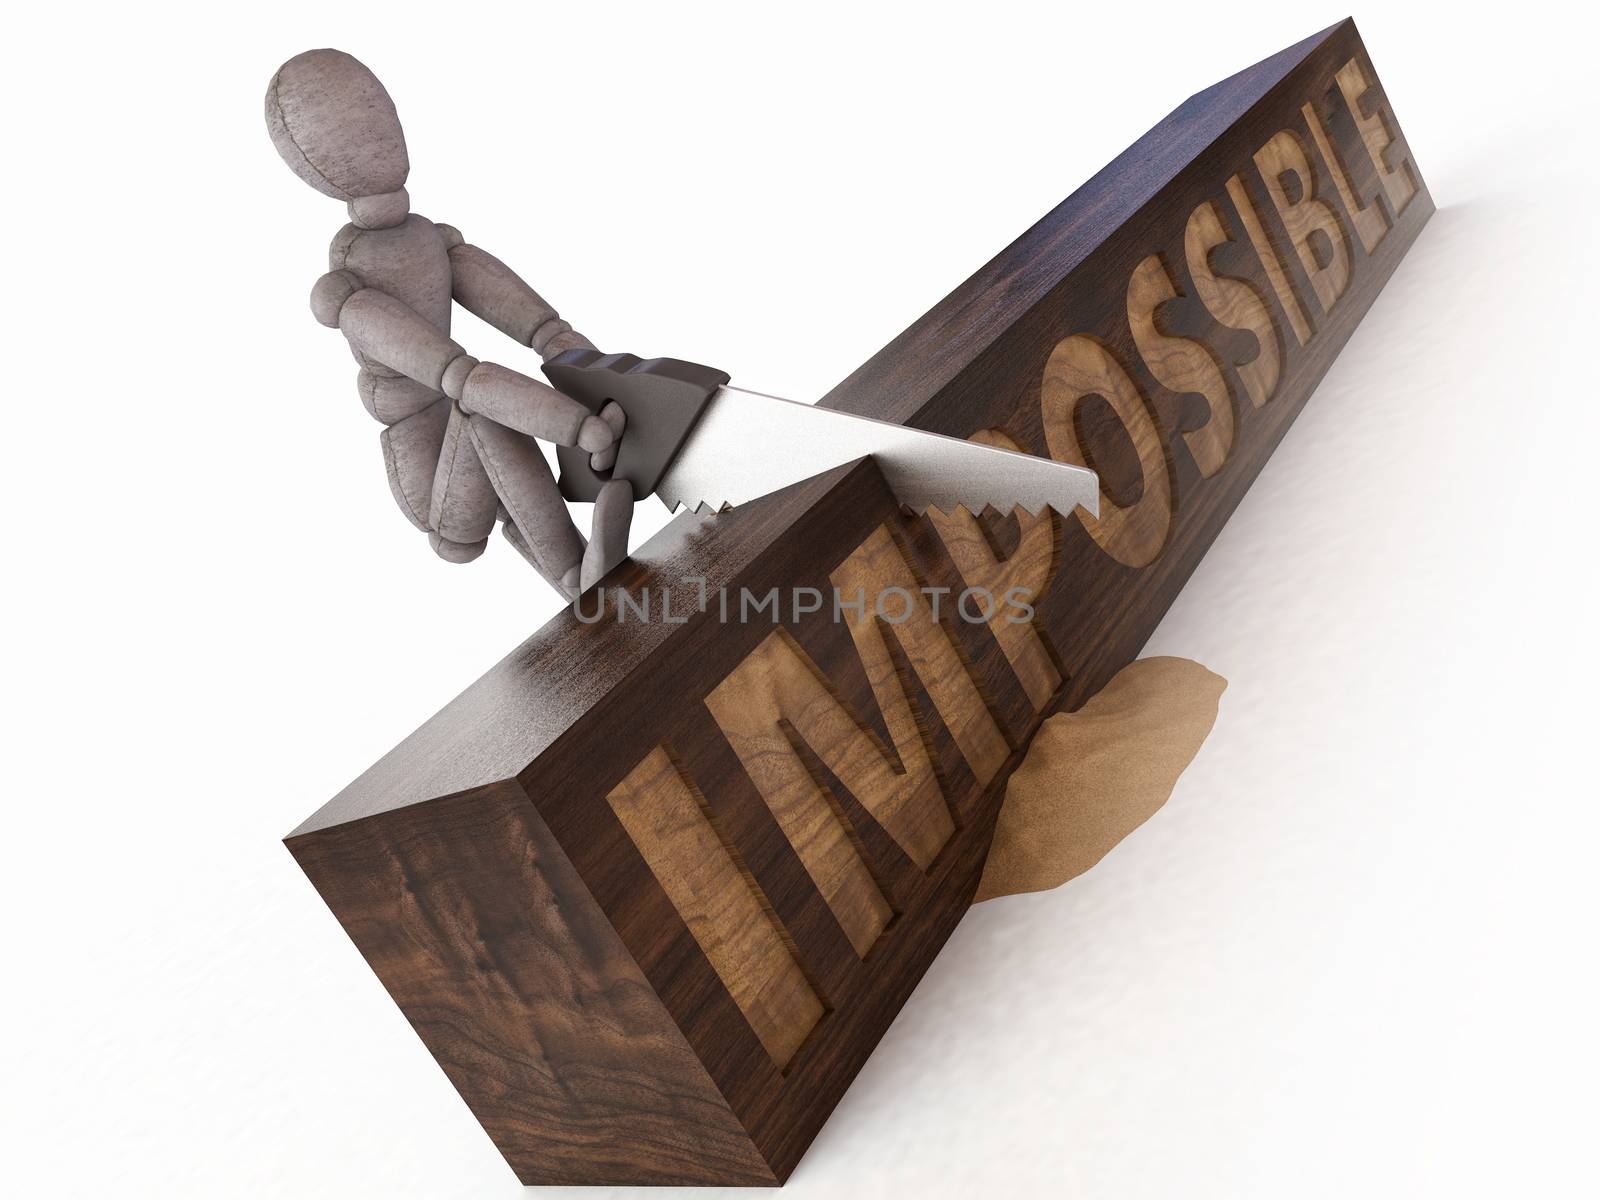 Doll Model sawing wooden block with inscription "impossible"